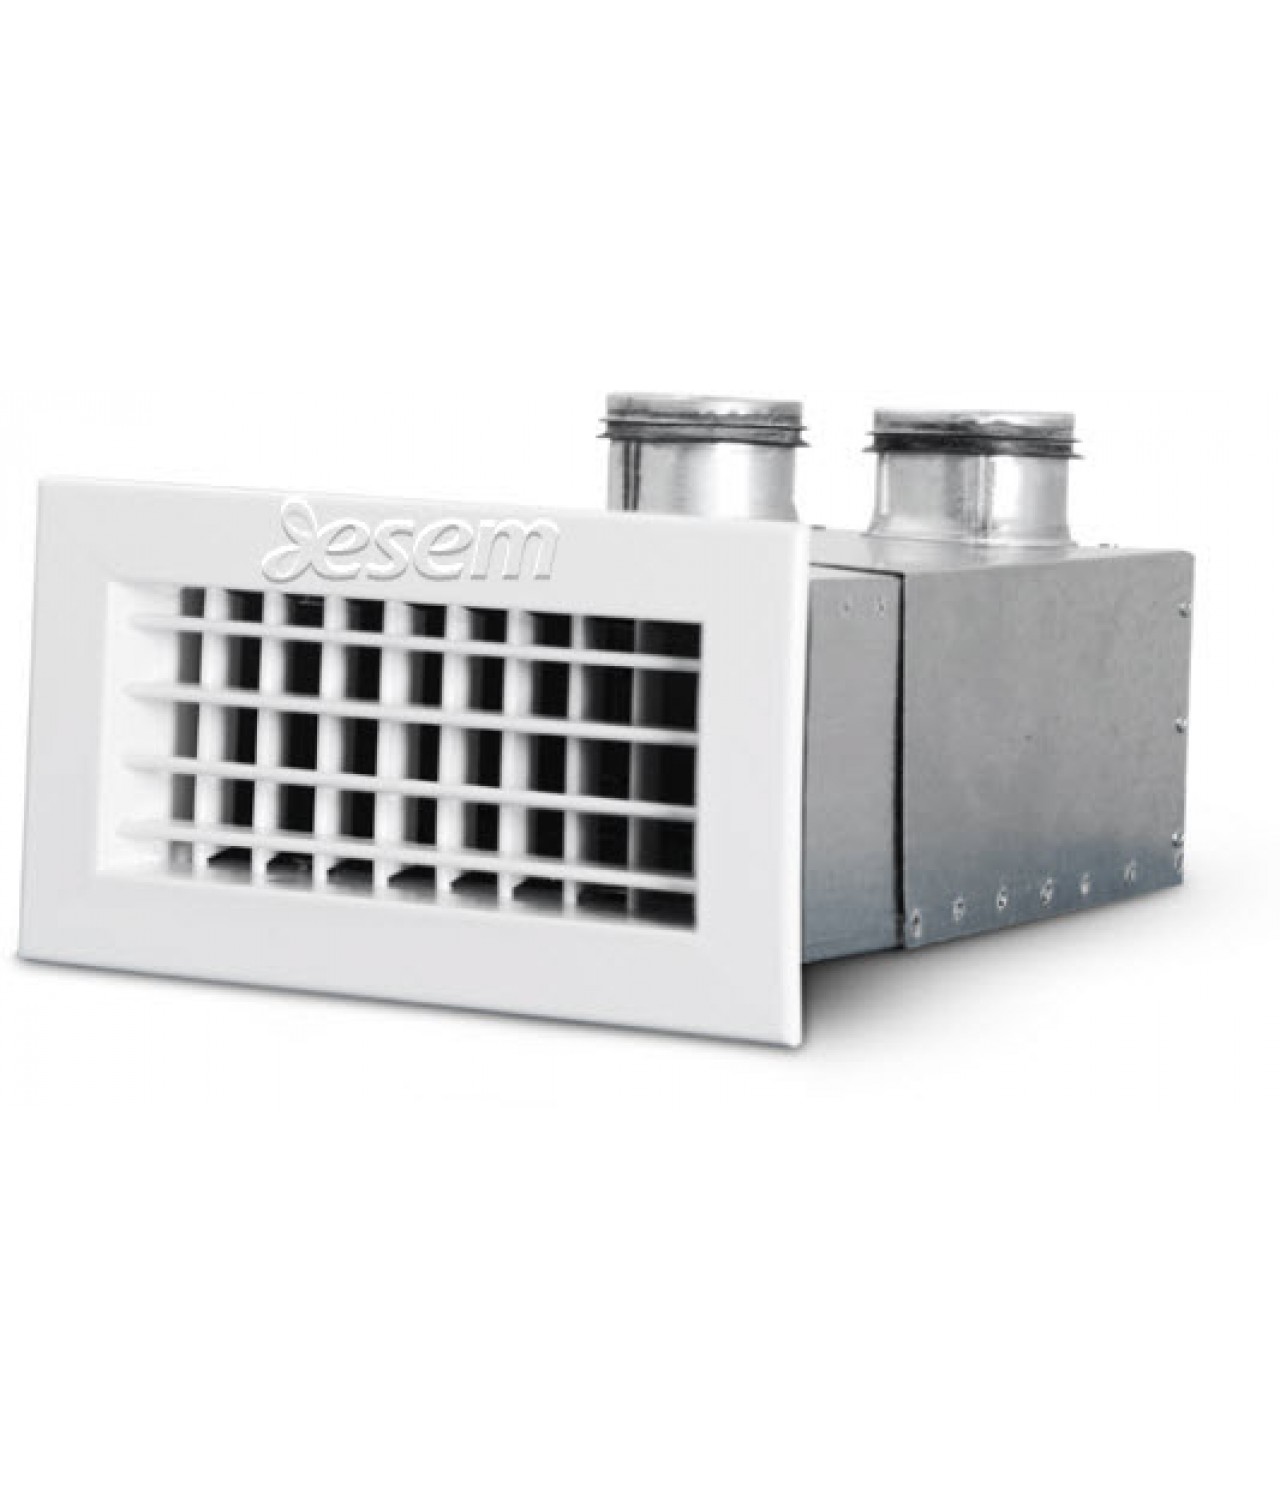 OSH distribution box with vent grilles